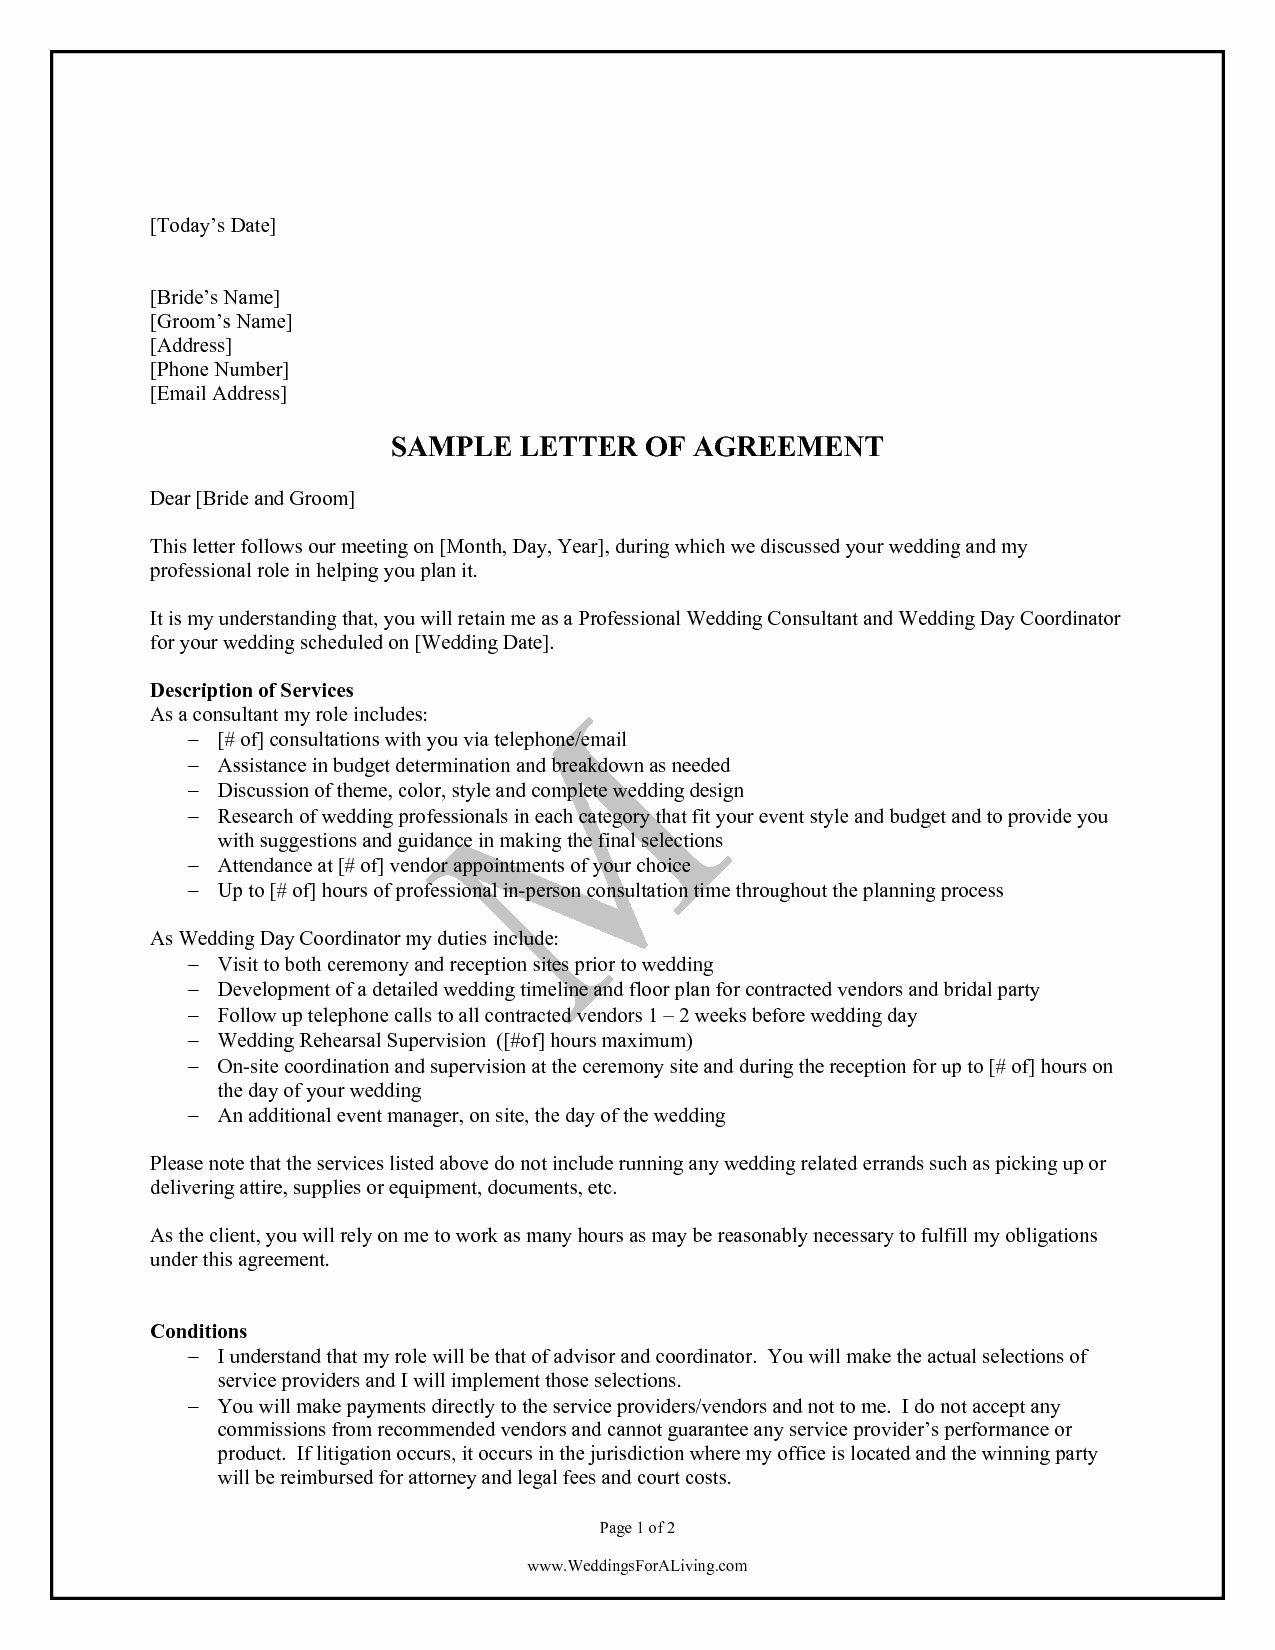 Client Termination Letter Template Beautiful Termination Contract Services Service Letter Sample Notice